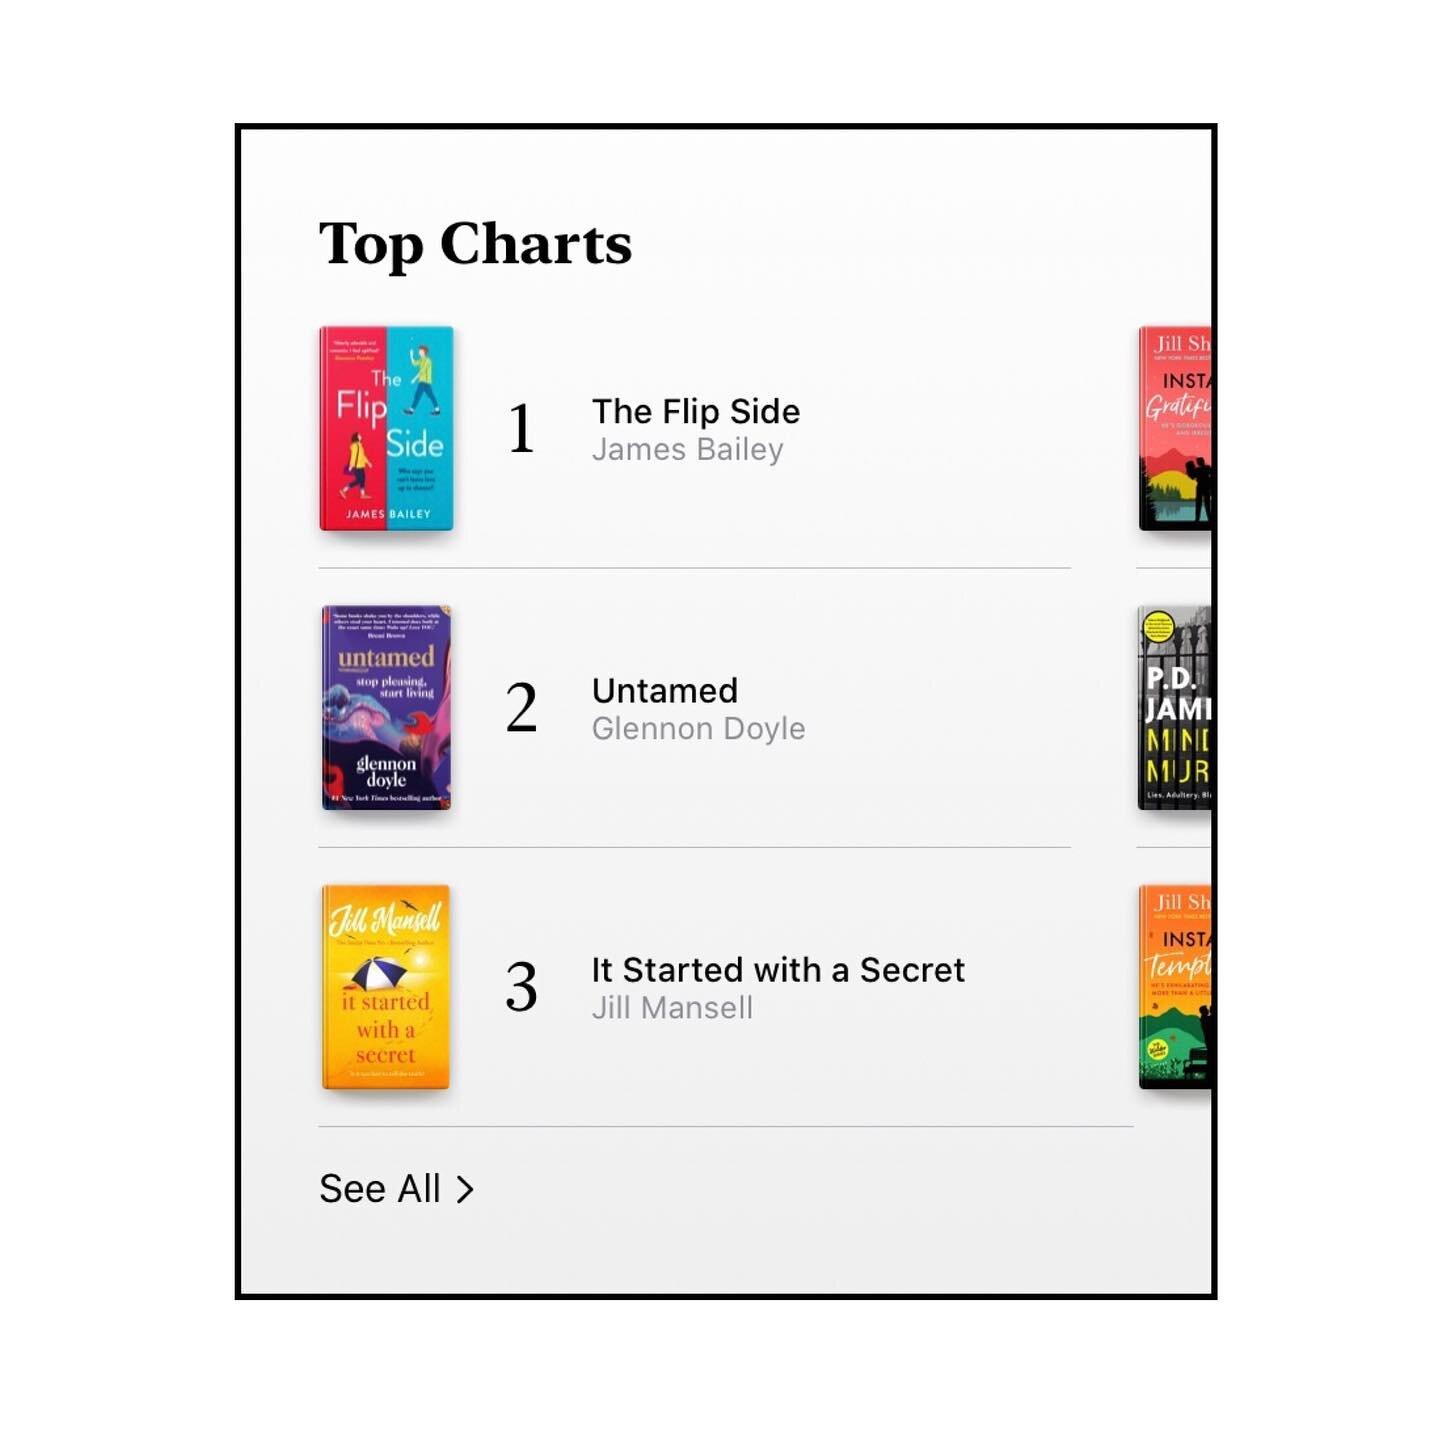 Absolutely insane to wake up to the news that THE FLIP SIDE is now the 𝗡𝗨𝗠𝗕𝗘𝗥 𝗢𝗡𝗘 𝗕𝗘𝗦𝗧 𝗦𝗘𝗟𝗟𝗜𝗡𝗚 𝗕𝗢𝗢𝗞 on Apple Books! 🥳 ⁣
⁣
Thanks so much to everyone who has bought a copy already 😀 If you&rsquo;ve not done so yet, then Amazo